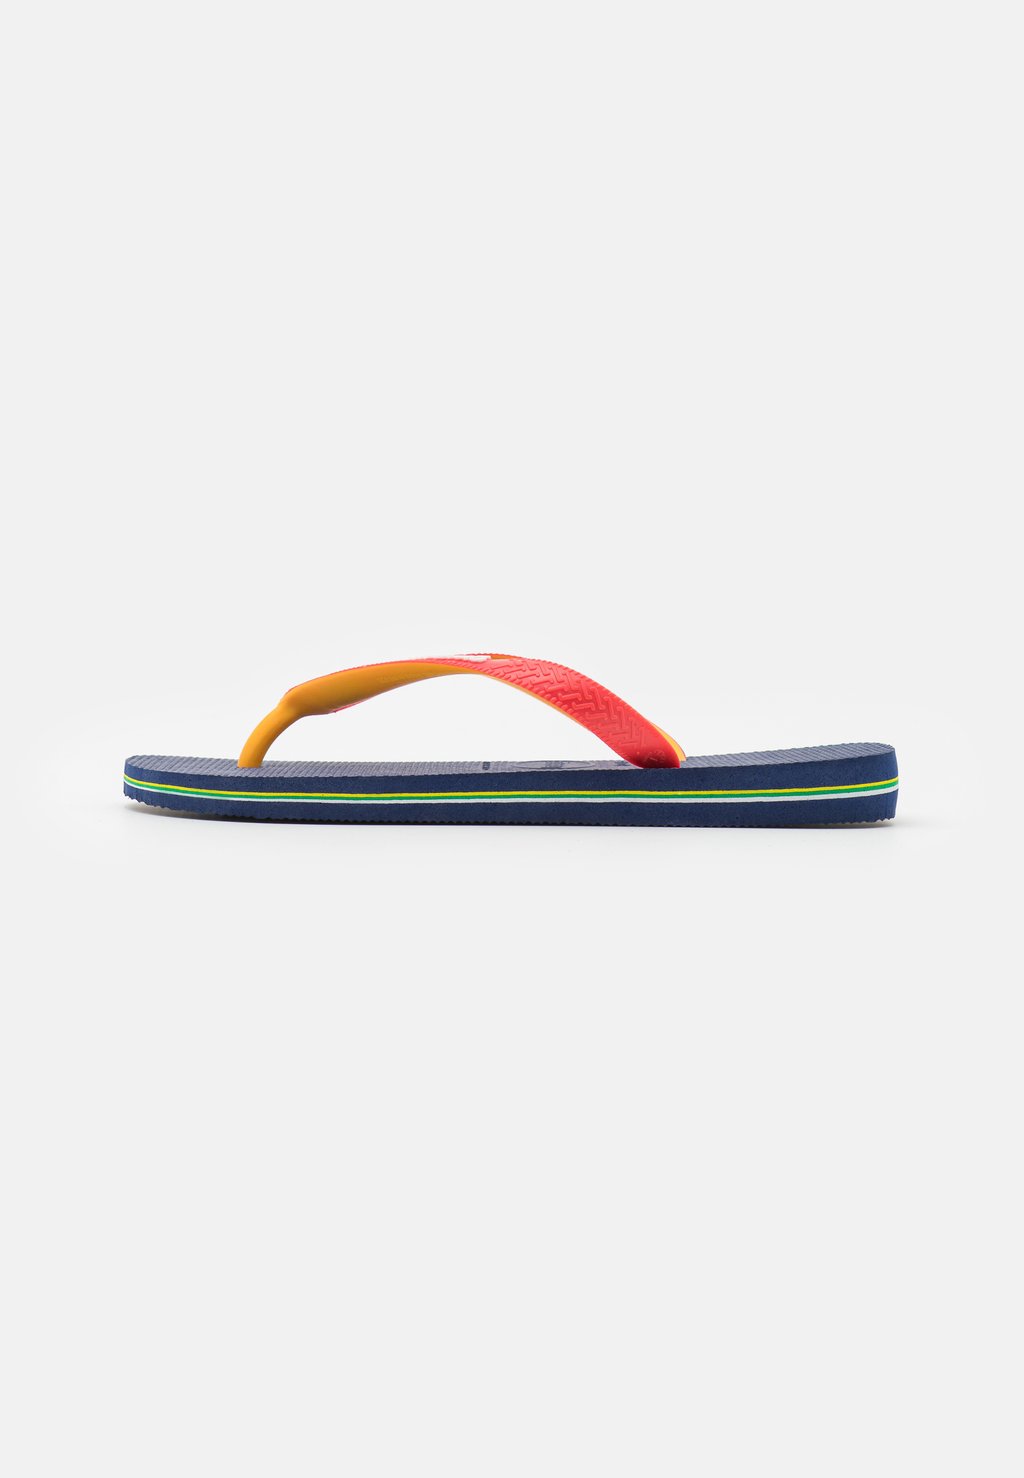 hissey jane ruby blue Шлепанцы Havaianas